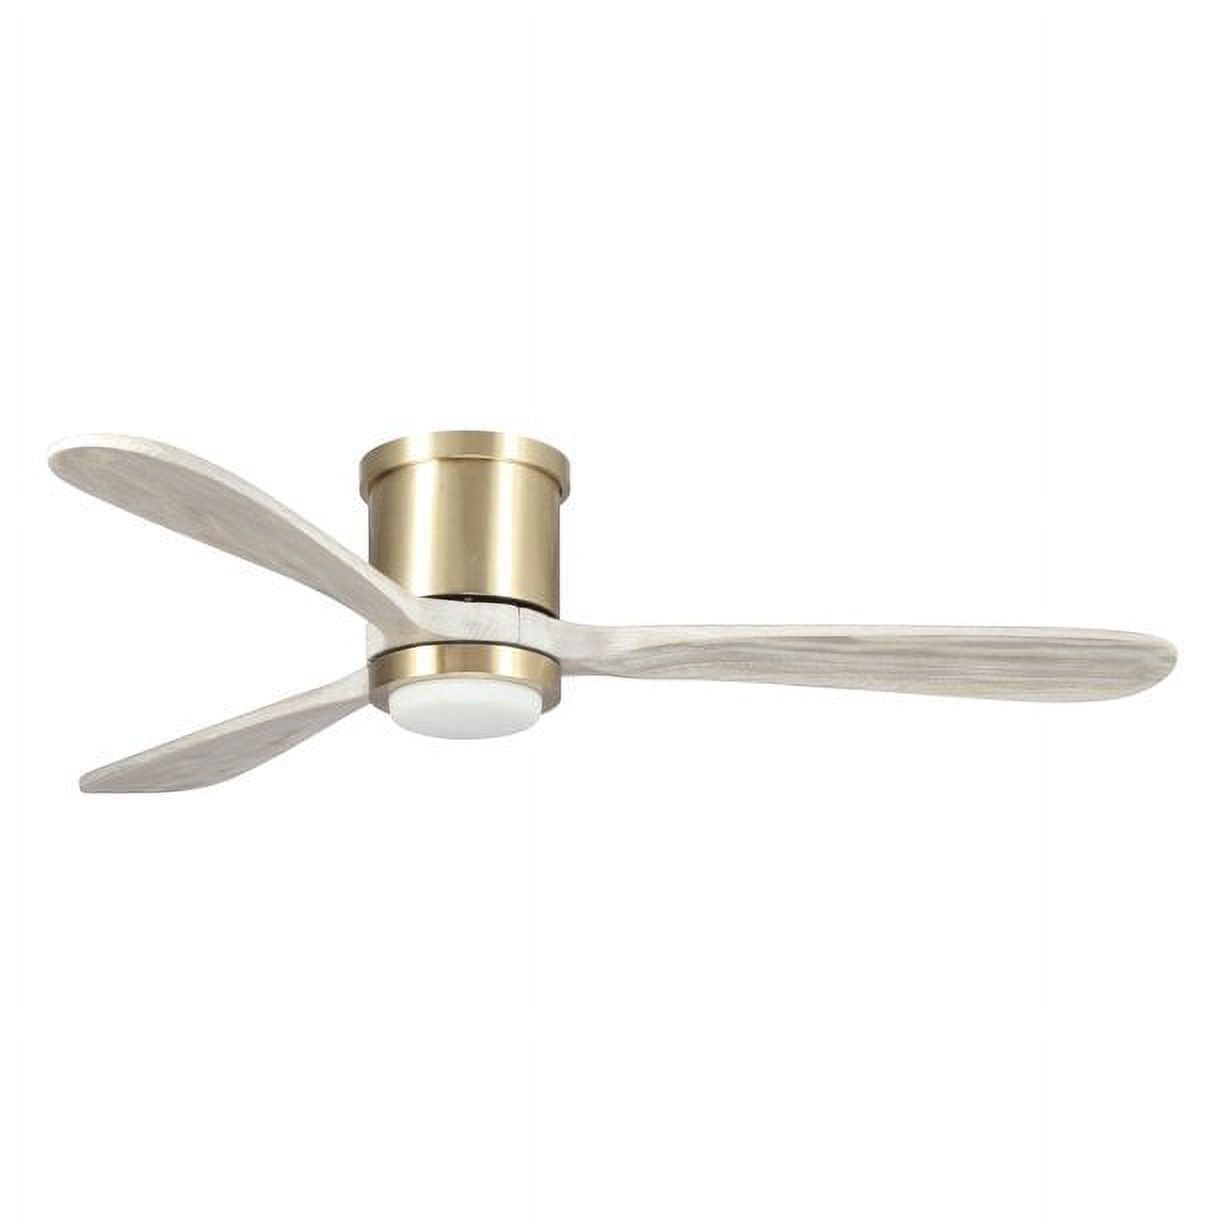 Low Profile Ceiling Fan with Lights 52 Inch Modern Flush Mount Ceiling Fan with Remote Control, Pale Gold - image 1 of 7